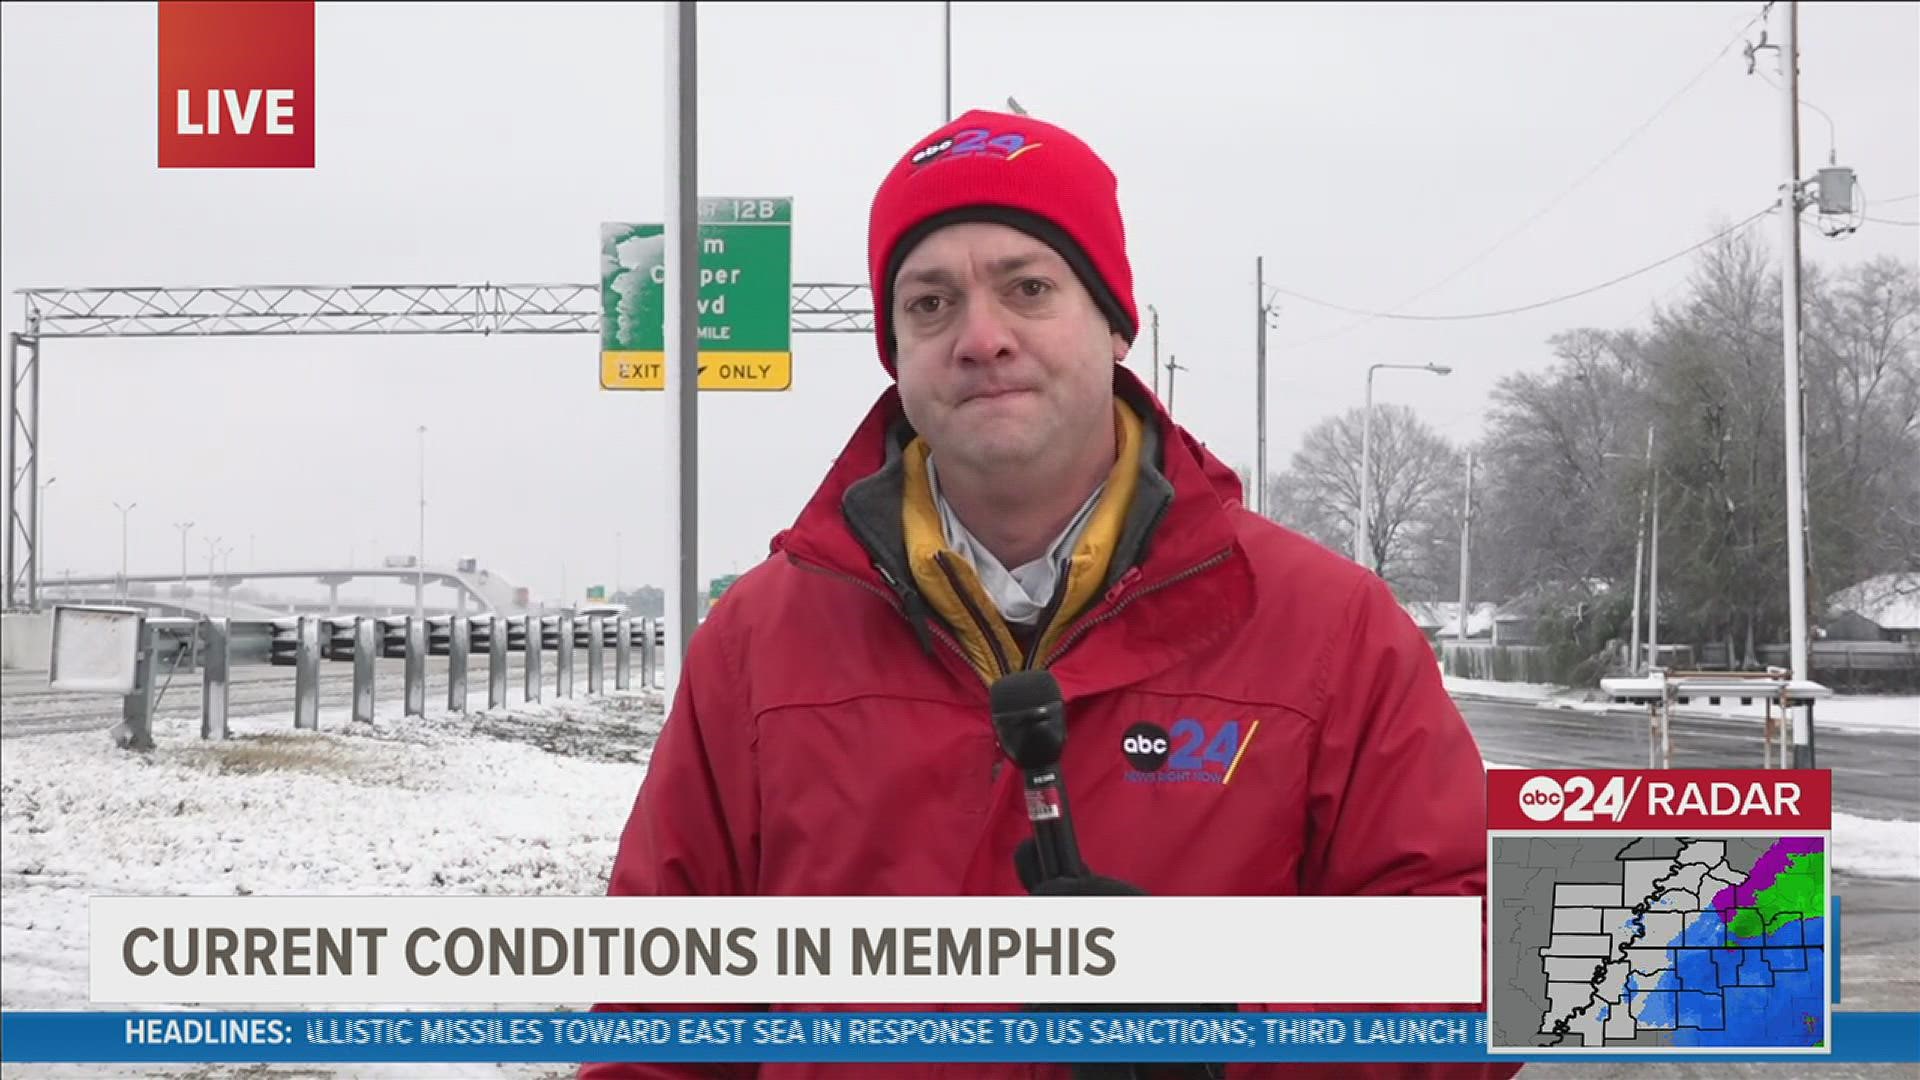 Brad Broders has an update on road conditions in Memphis.